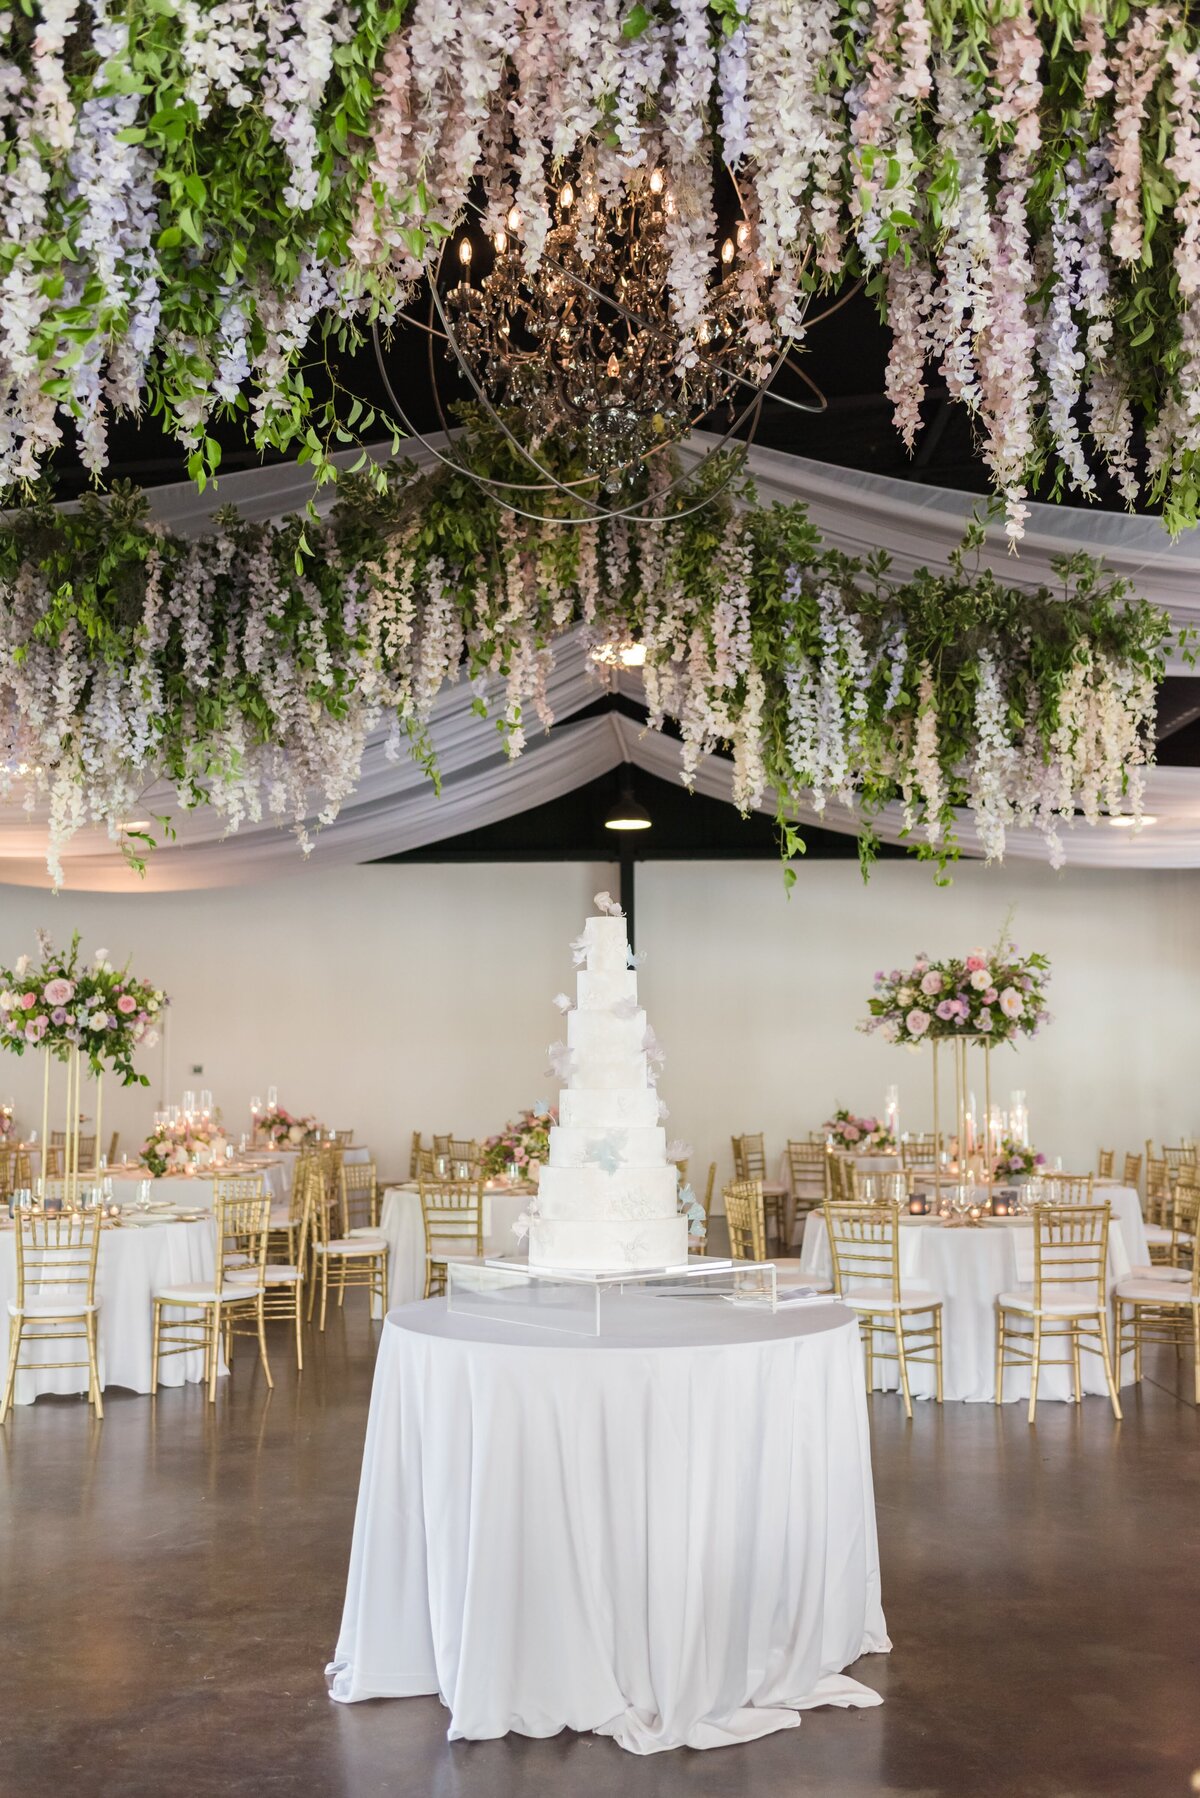 Tiered wedding cake hanging florals The Estate at Cherokee Dock